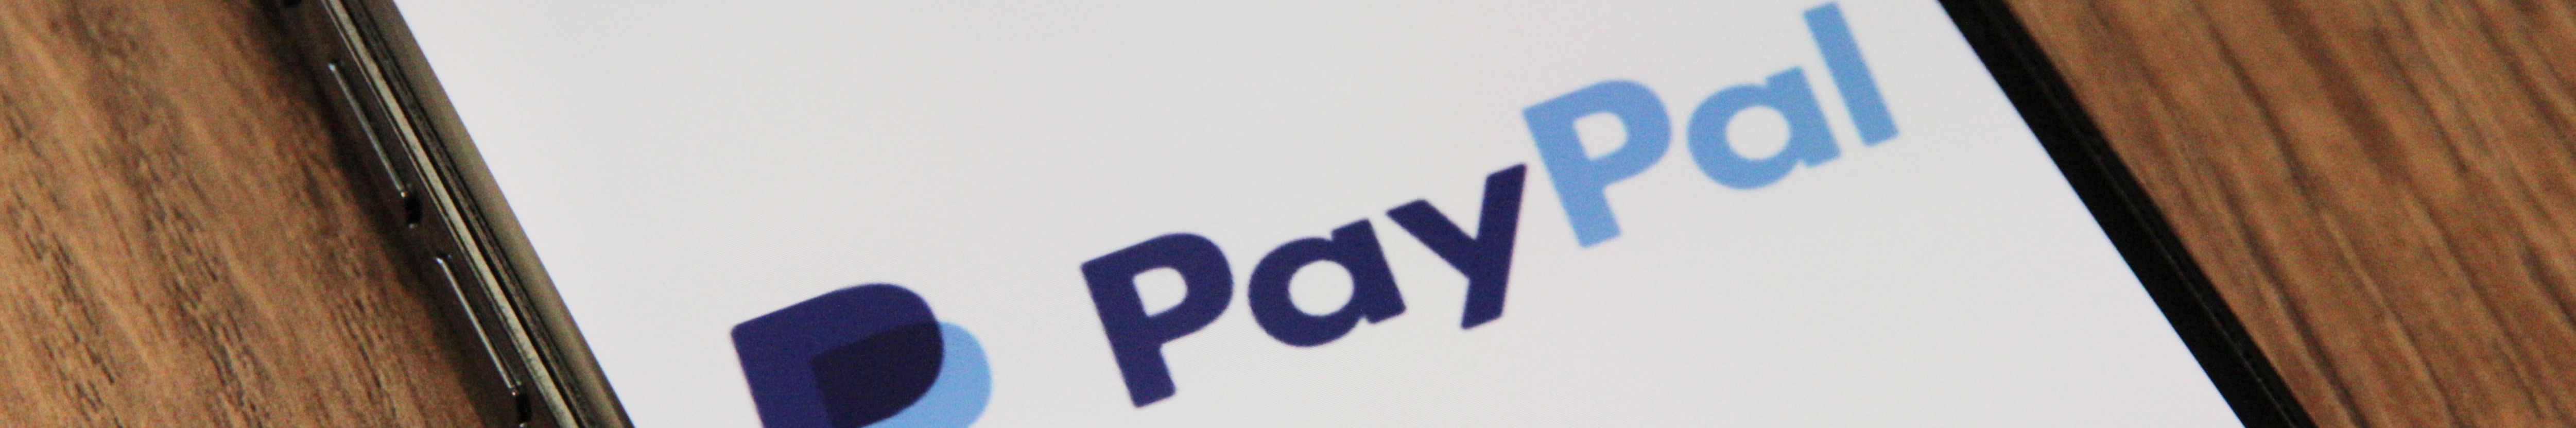 In 2022, women represented 44% of Paypal's total workforce and 36% at the leadership roles